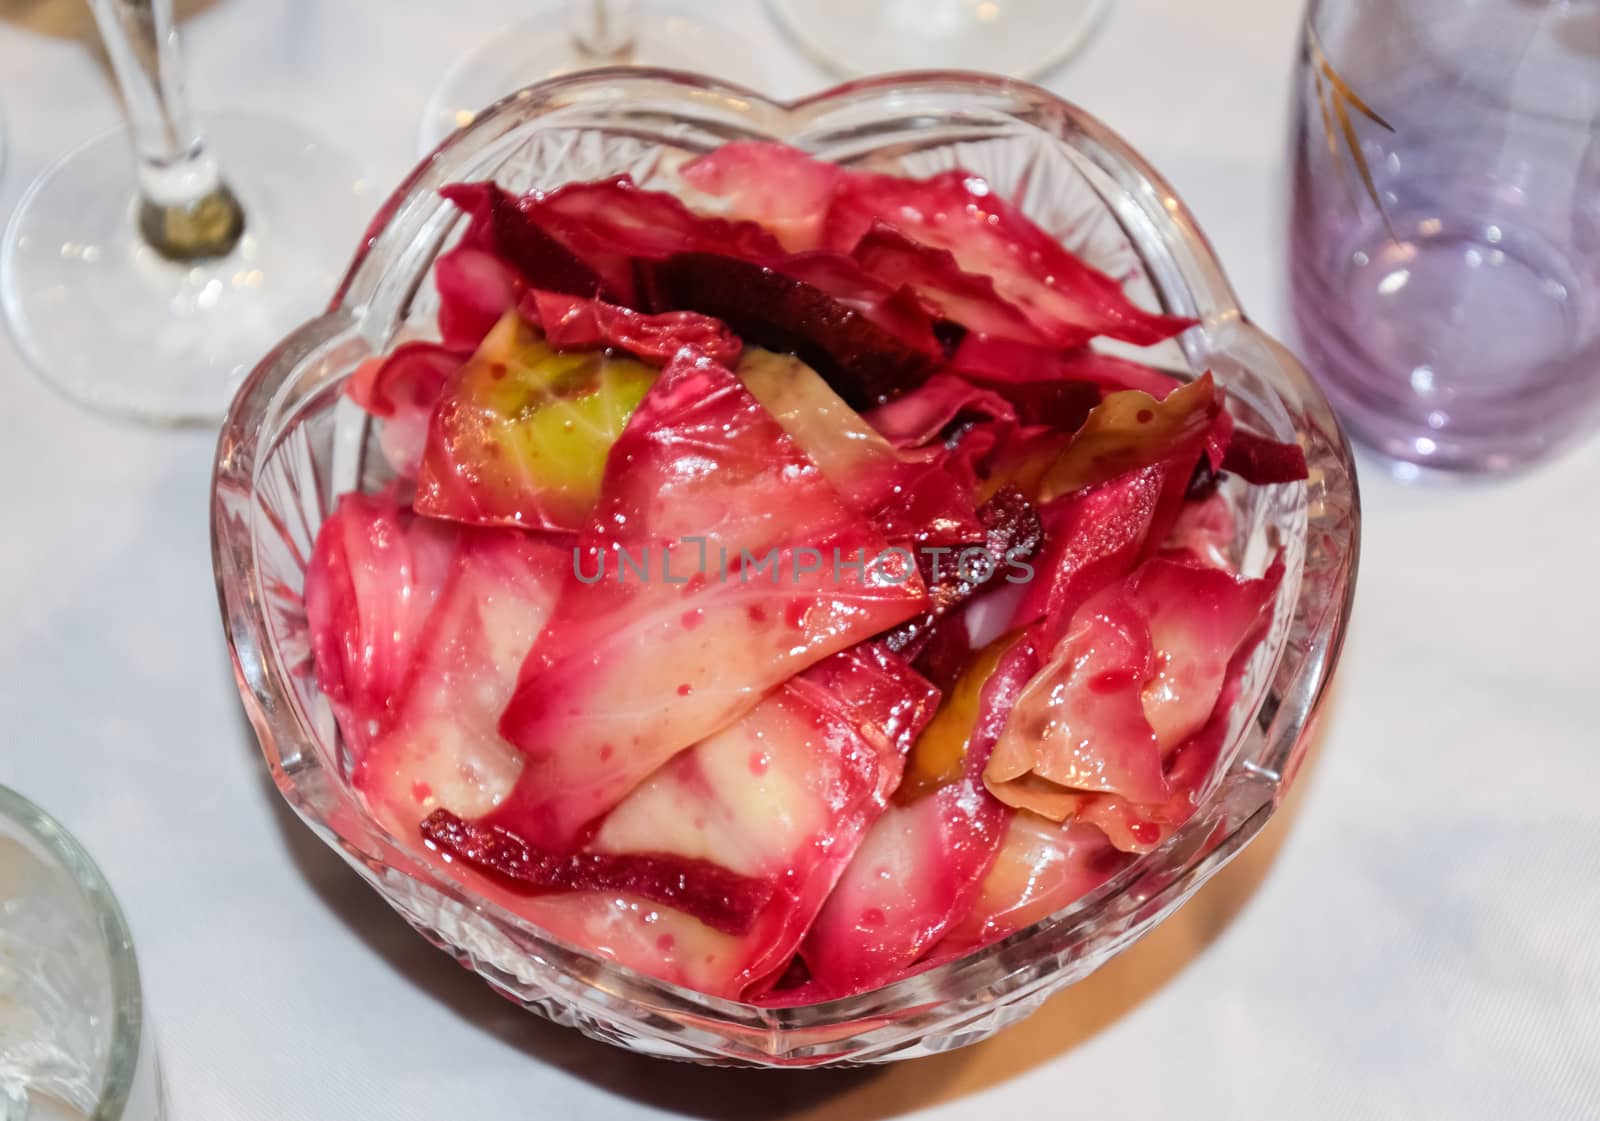 Cabbage leaf salad with beetroot. The salad is in a plate on the table.